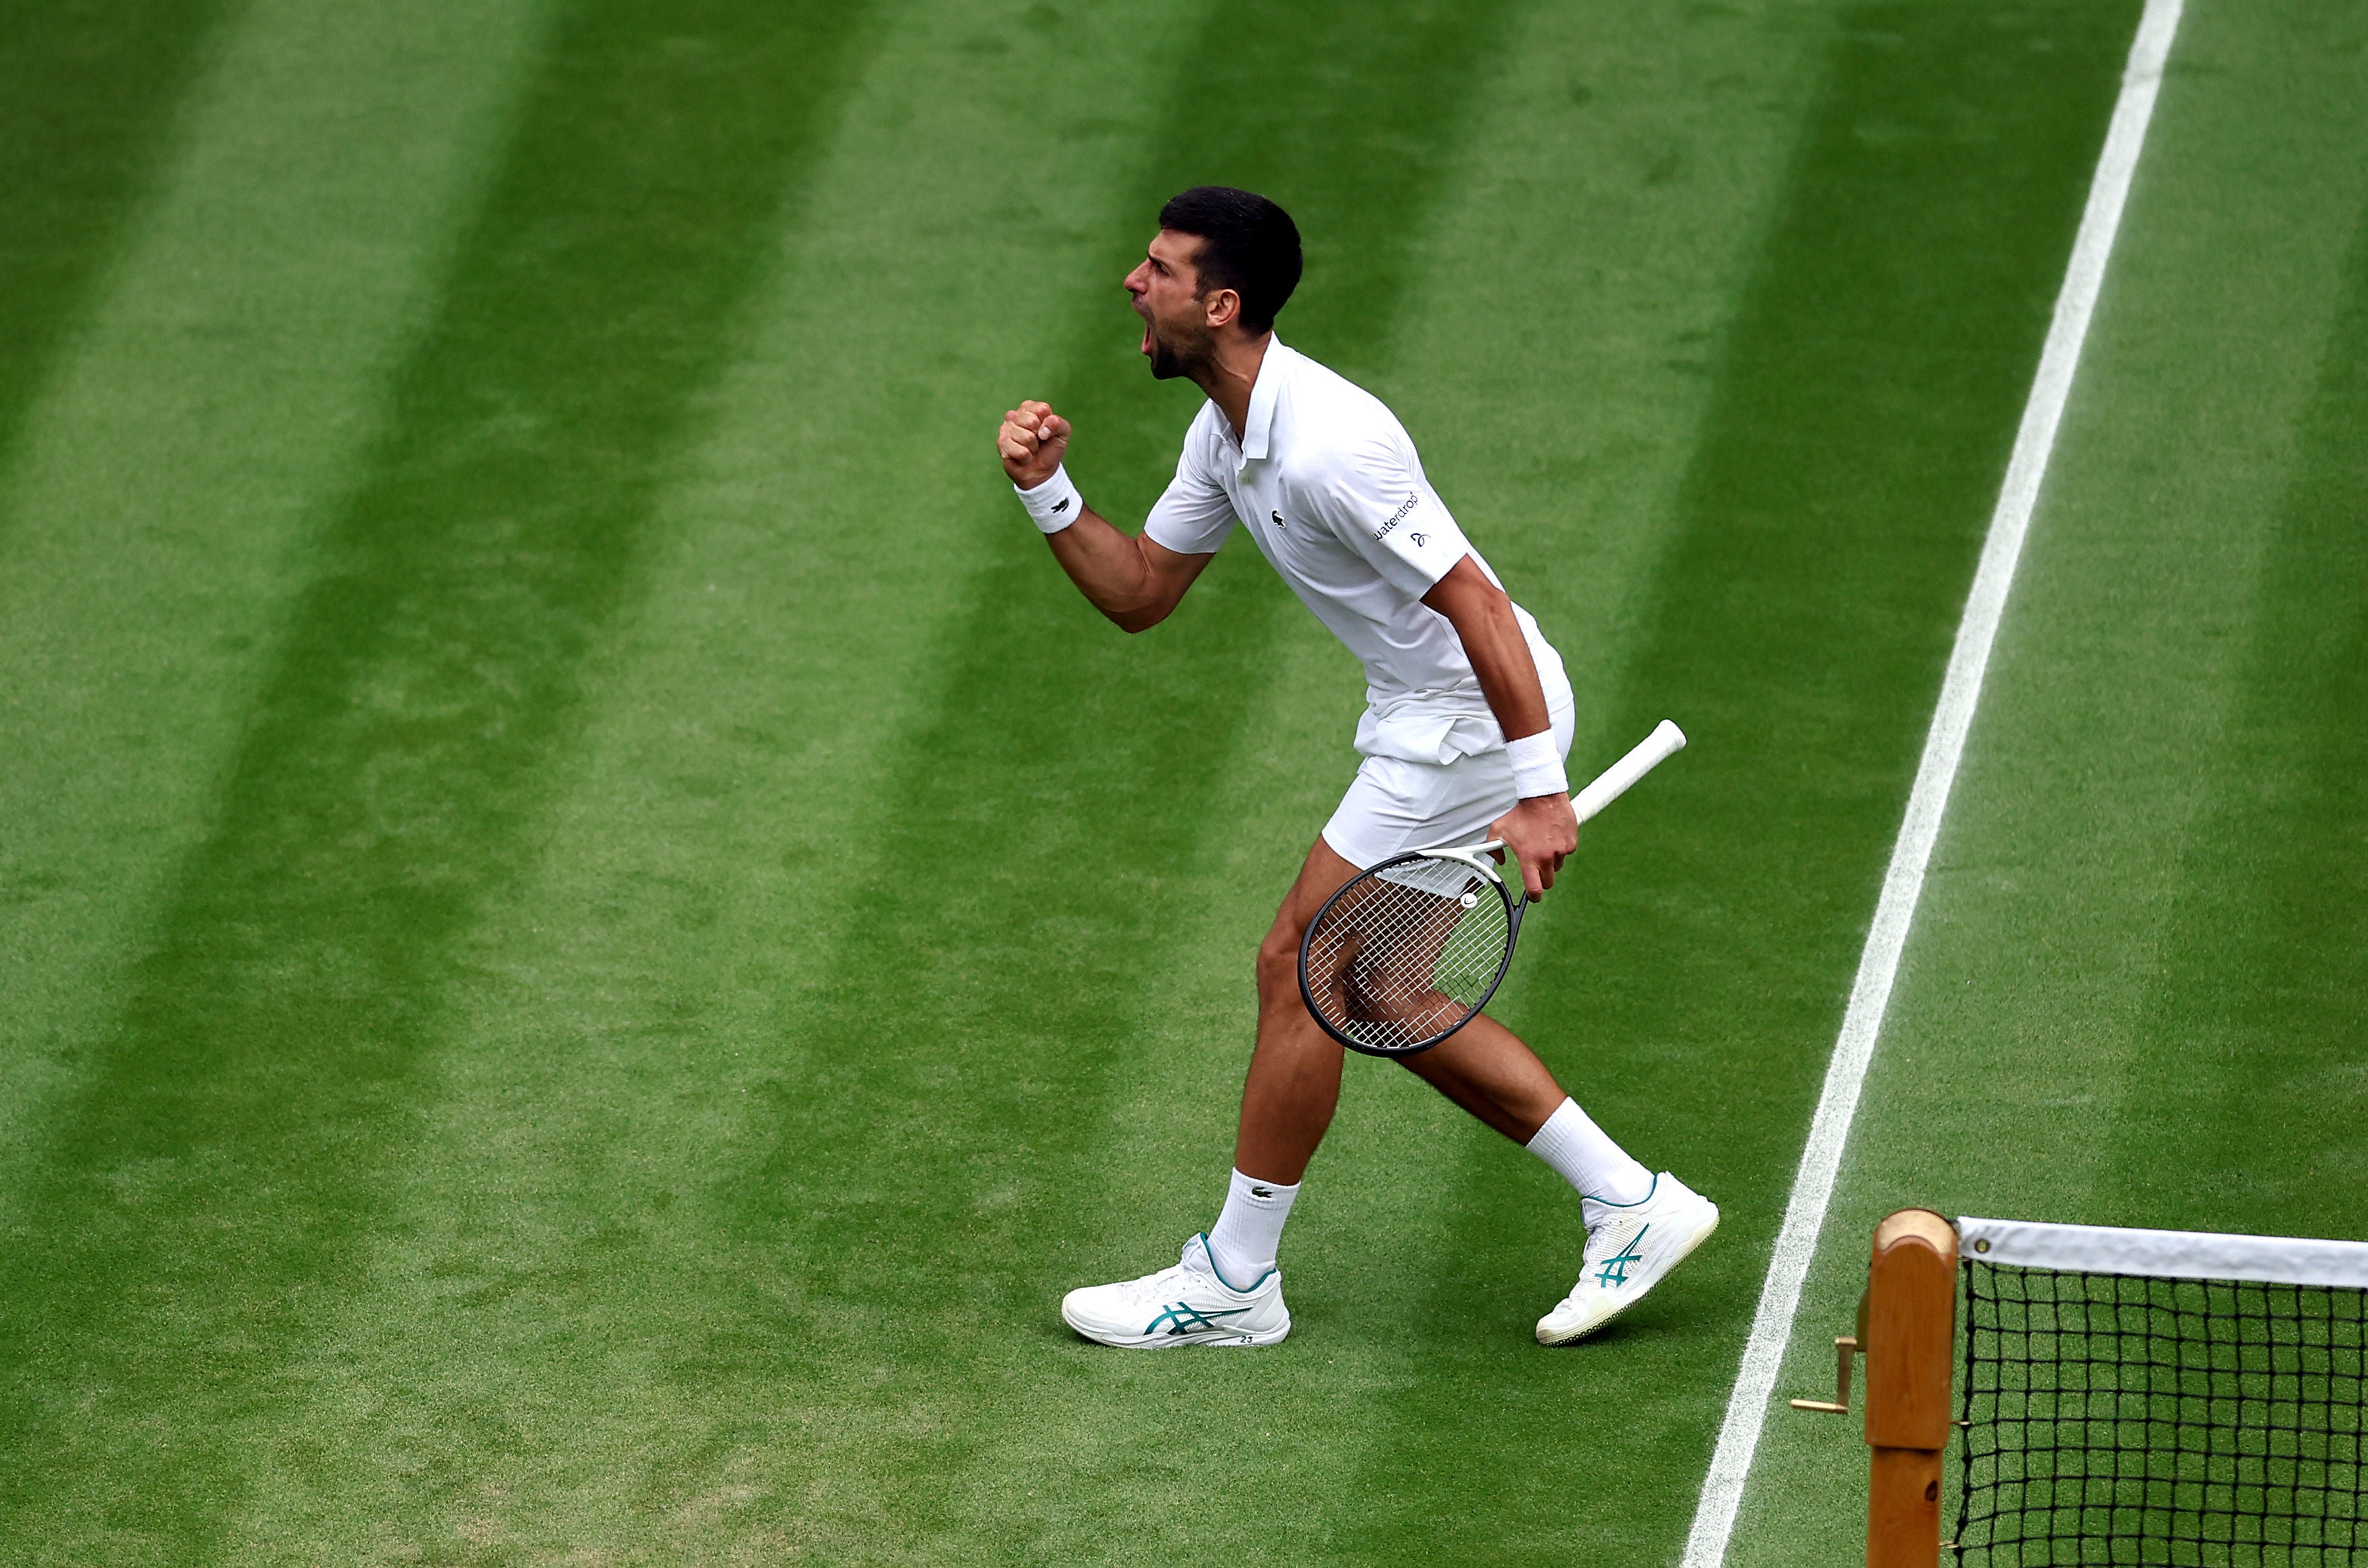 A fired-up Djokovic battles to win the third set against Rublev